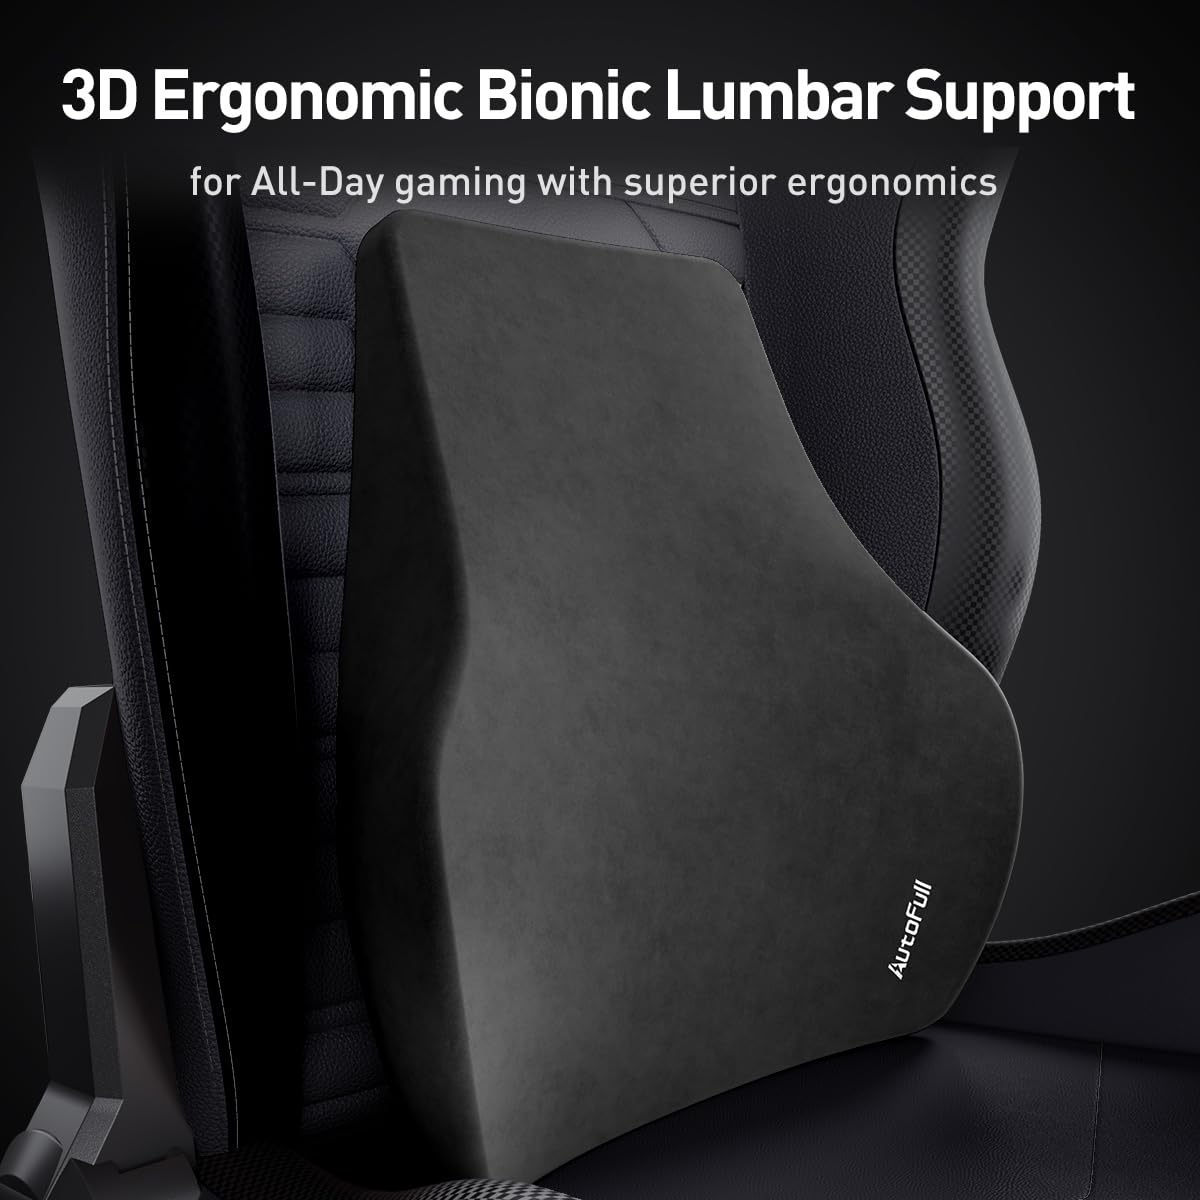 AutoFull Gaming Chair PC Chair with Ergonomics Lumbar Support, Racing Style PU Leather High Back Adjustable Swivel Task Chair with Footrest(Black)